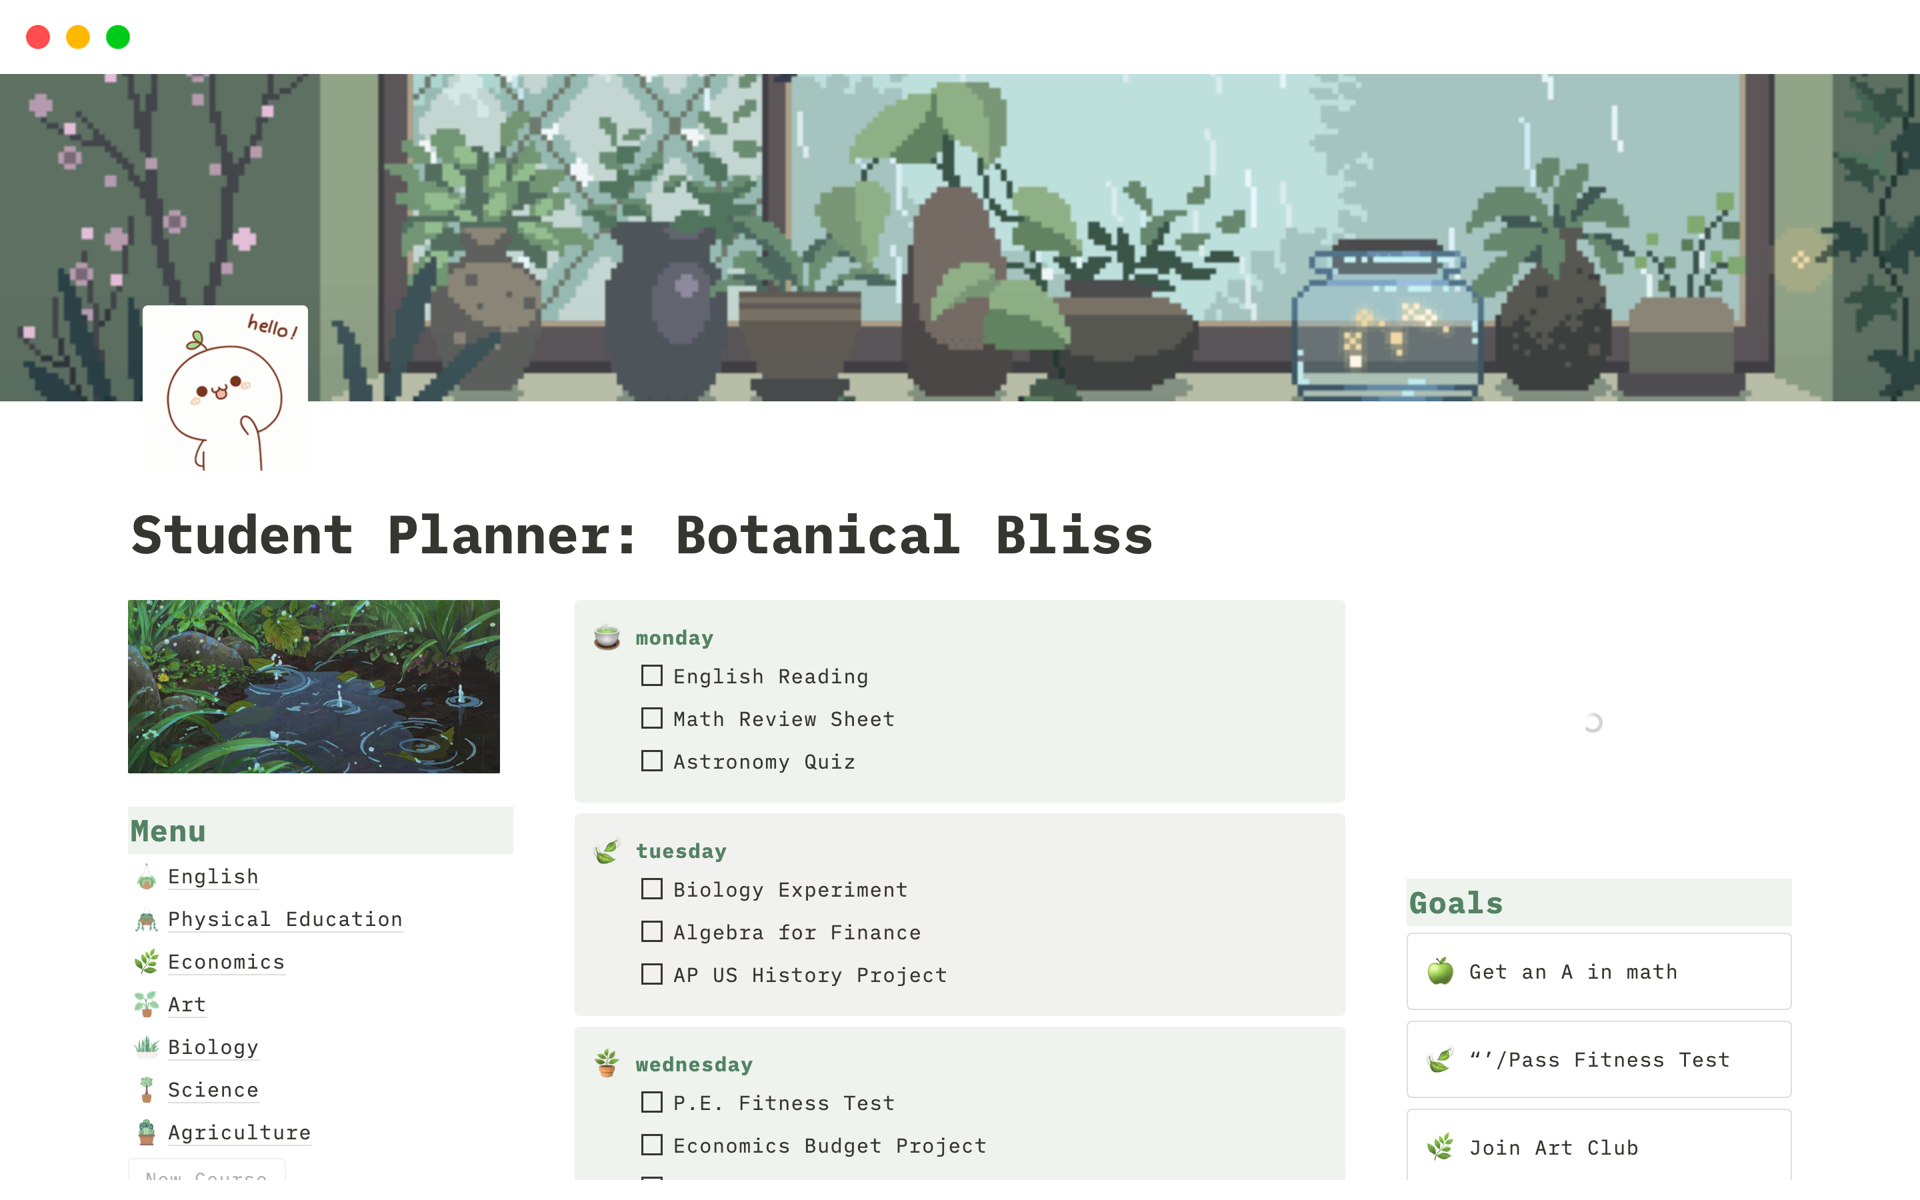 The Botanical Bliss Student Planner merges a plant theme with curated Spotify playlists, fostering a visually soothing and focused academic environment. It transforms the study routine for enhanced concentration, motivation, and academic success.